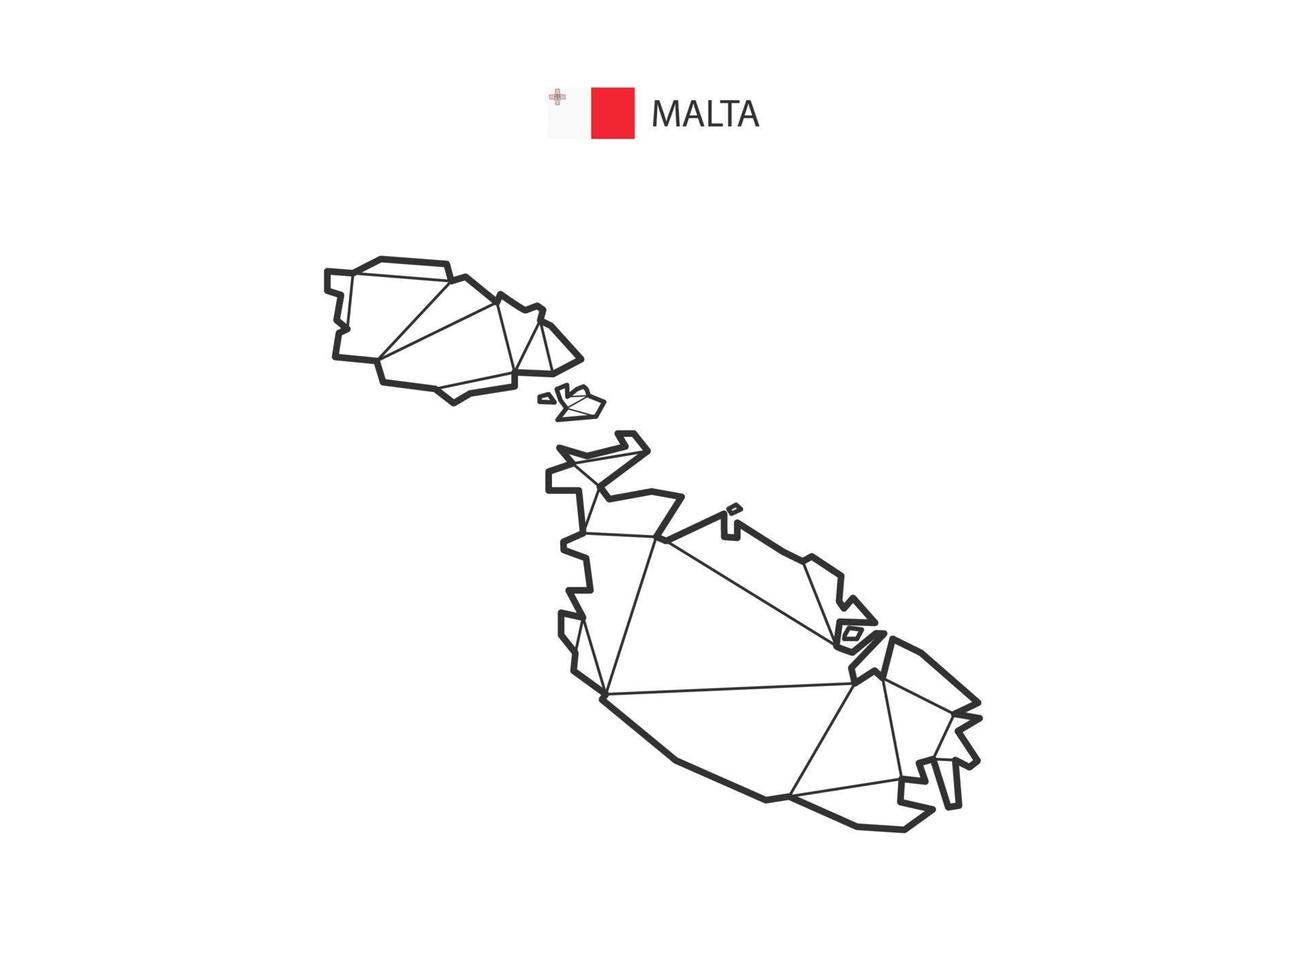 Mosaic triangles map style of Malta isolated on a white background. Abstract design for vector. vector